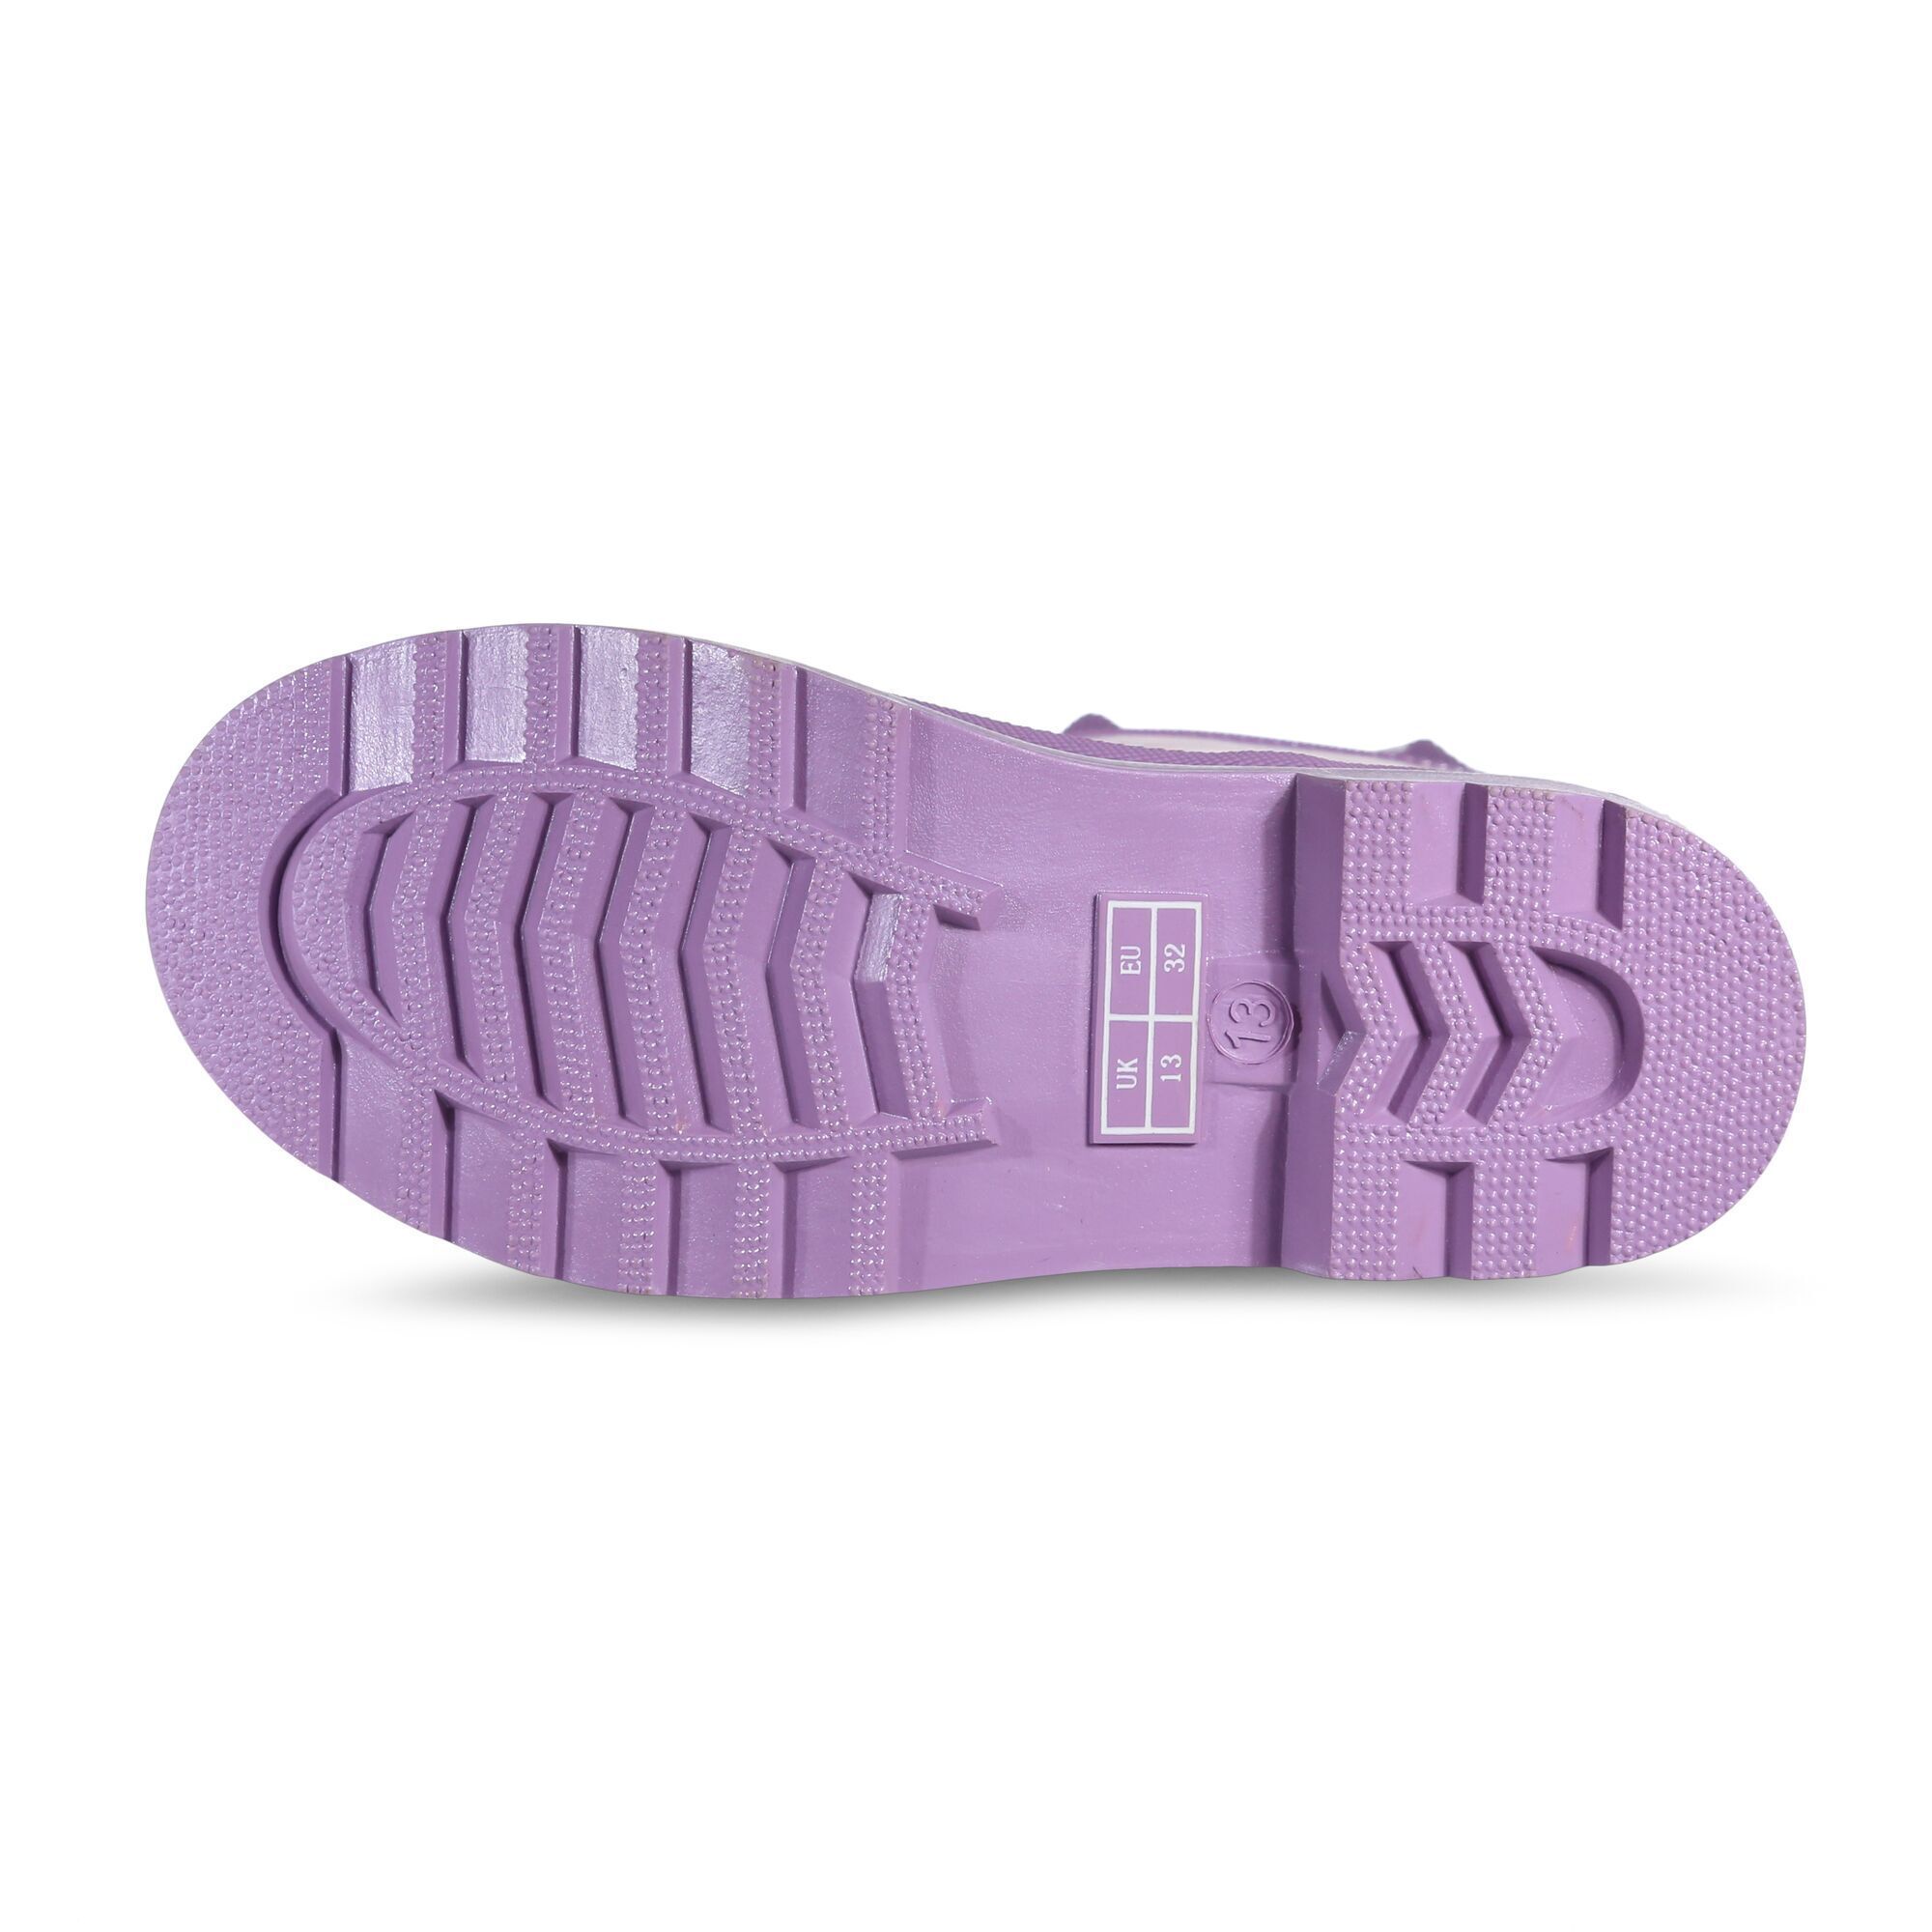 Upper: Rubber. Lining: Cotton. Midsole: EVA (Ethyl Vinyl Acetate). Outsole: Cleated. Fabric Technology: Durable, Waterproof. Hardwearing, Pull Handle. Block Heel. Cut: Mid Calf. Design: Jelly Fish, Logo, Mermaid, Starfish. Sole Features: Extra Stability, Multi Directional Grooves. Fastening: Slip-In.